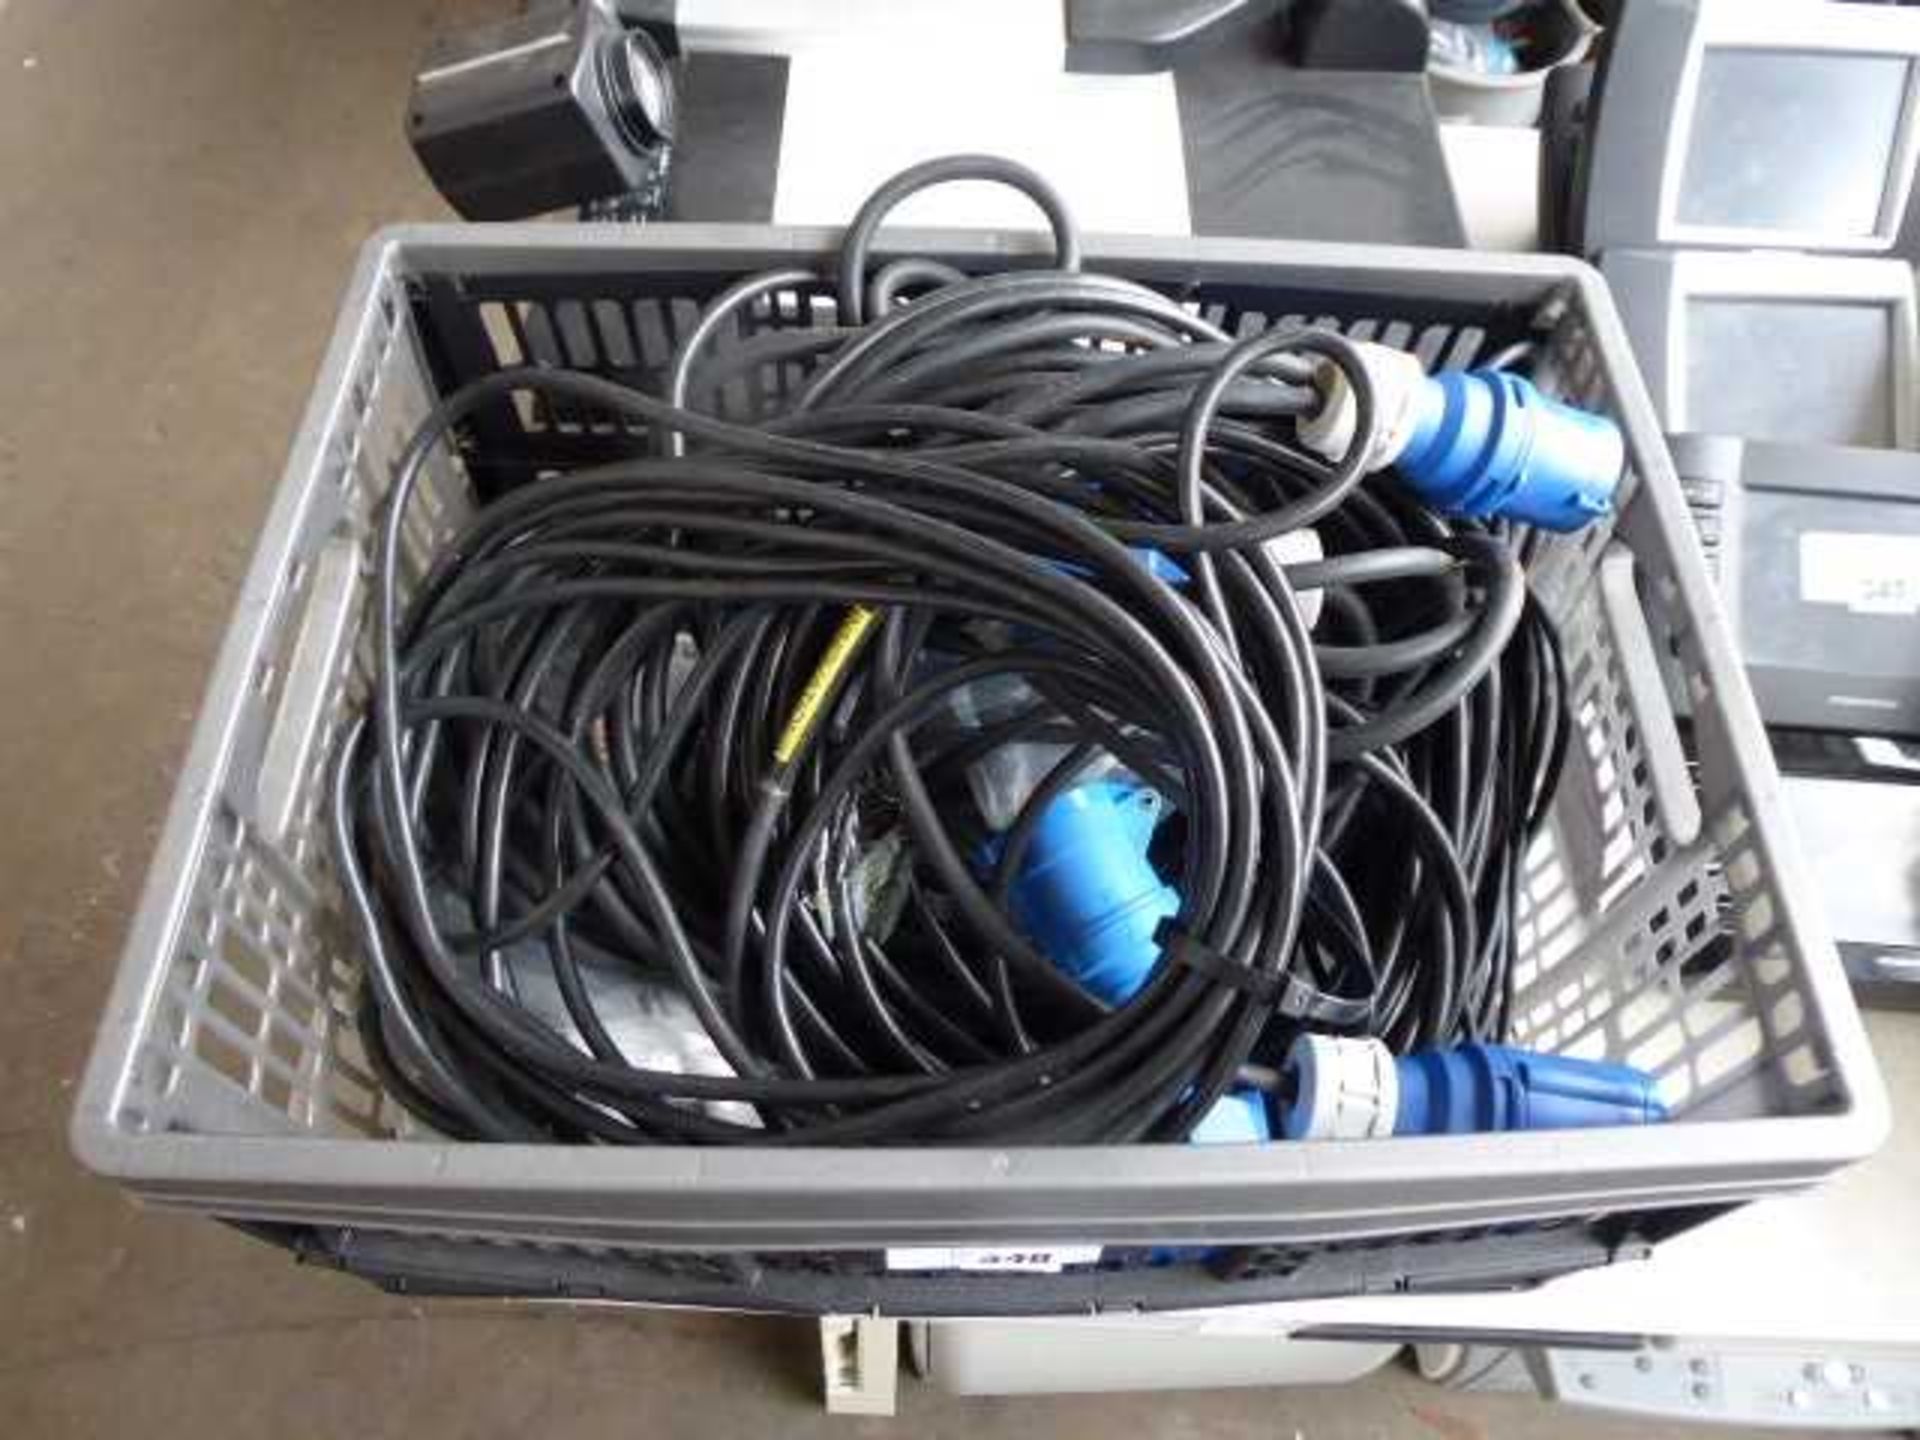 +VAT Tray containing blue commando type plugs and extension cable